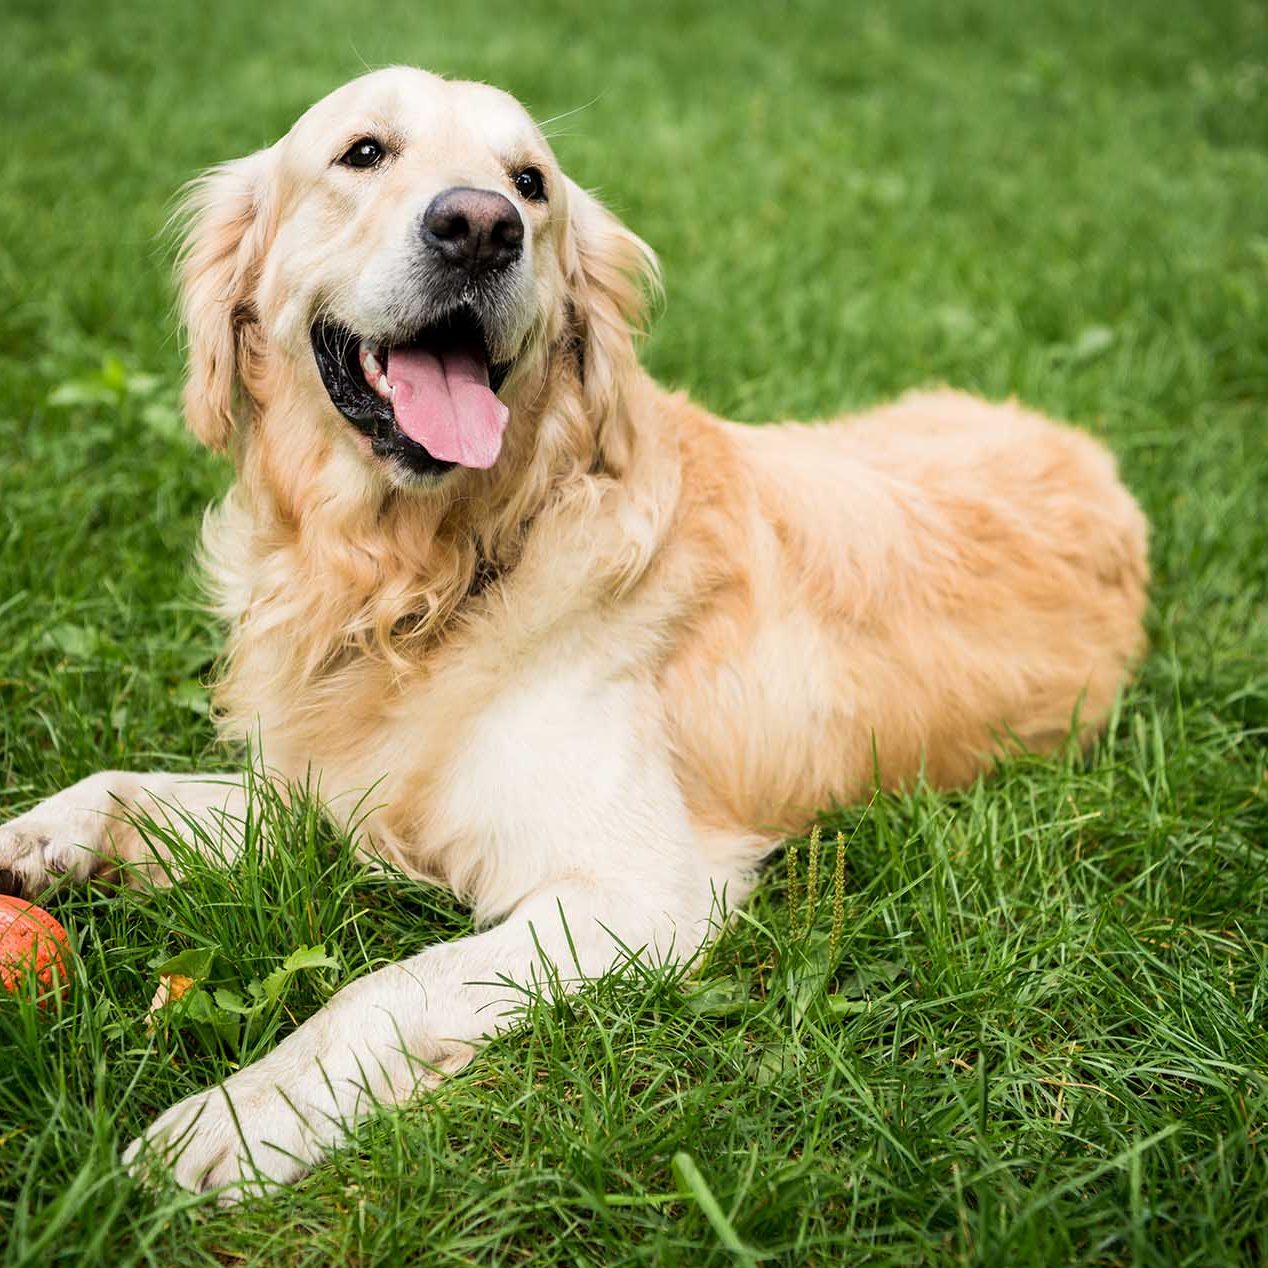 adorable golden retriever dog lying on green lawn in park